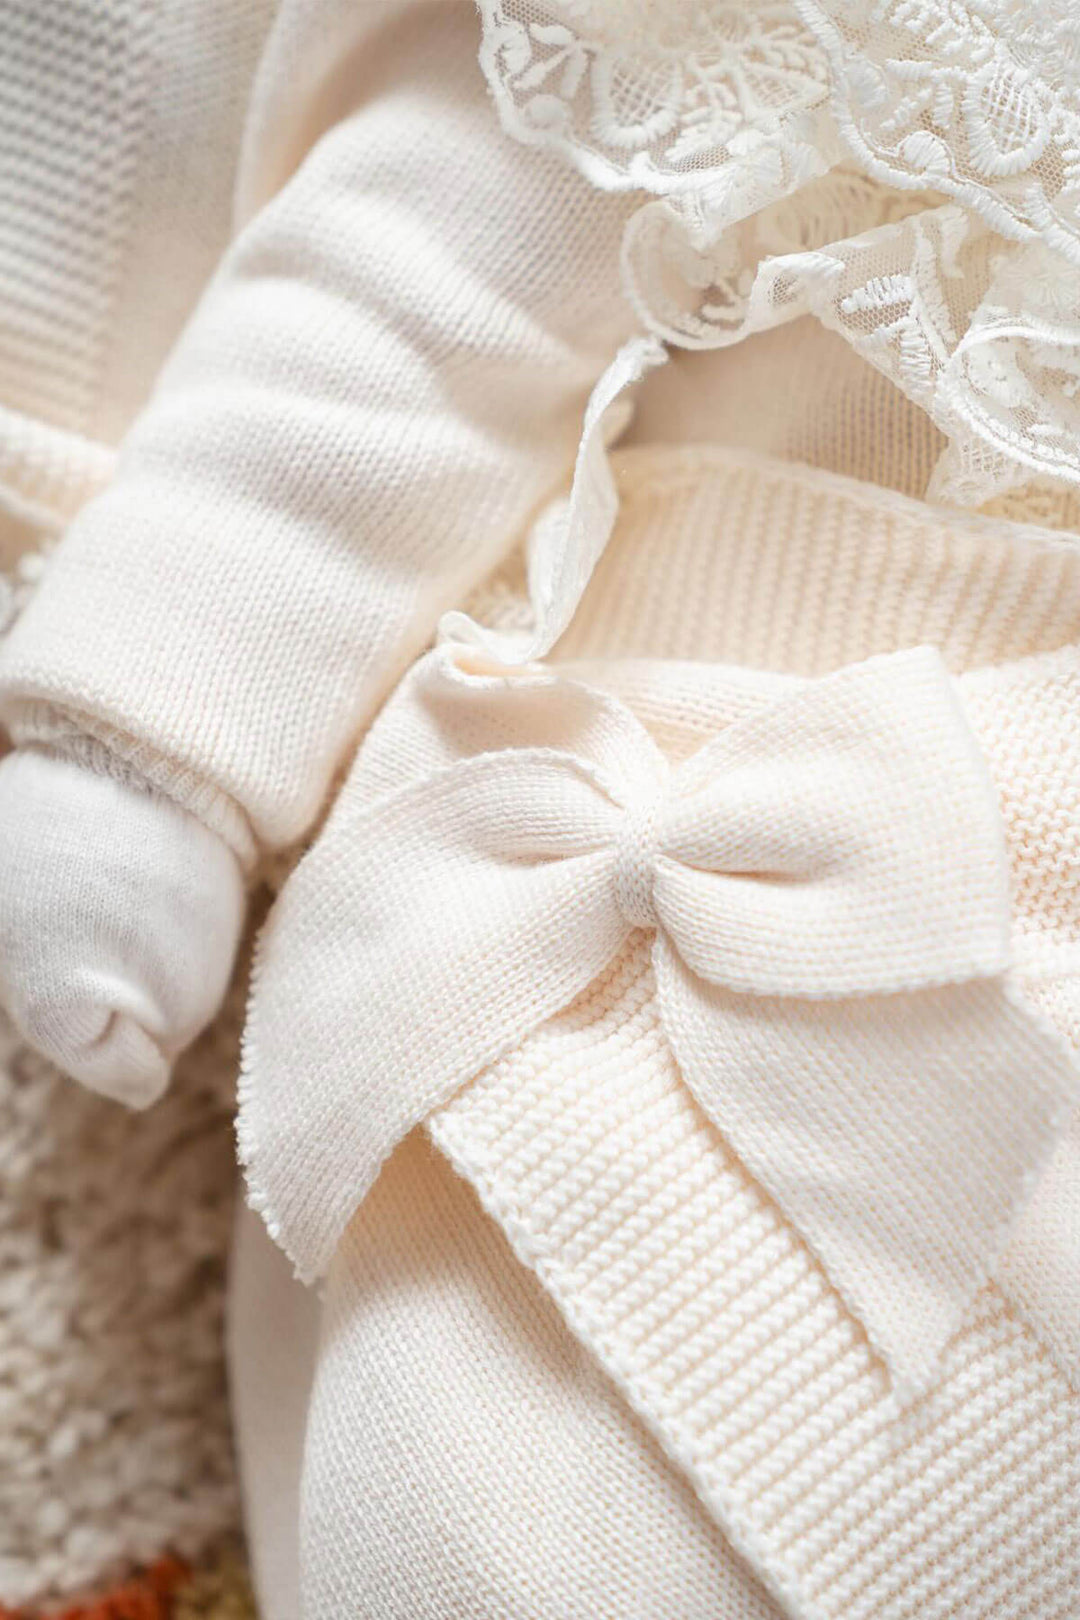 knitwear coming home outfit for newborn baby girl